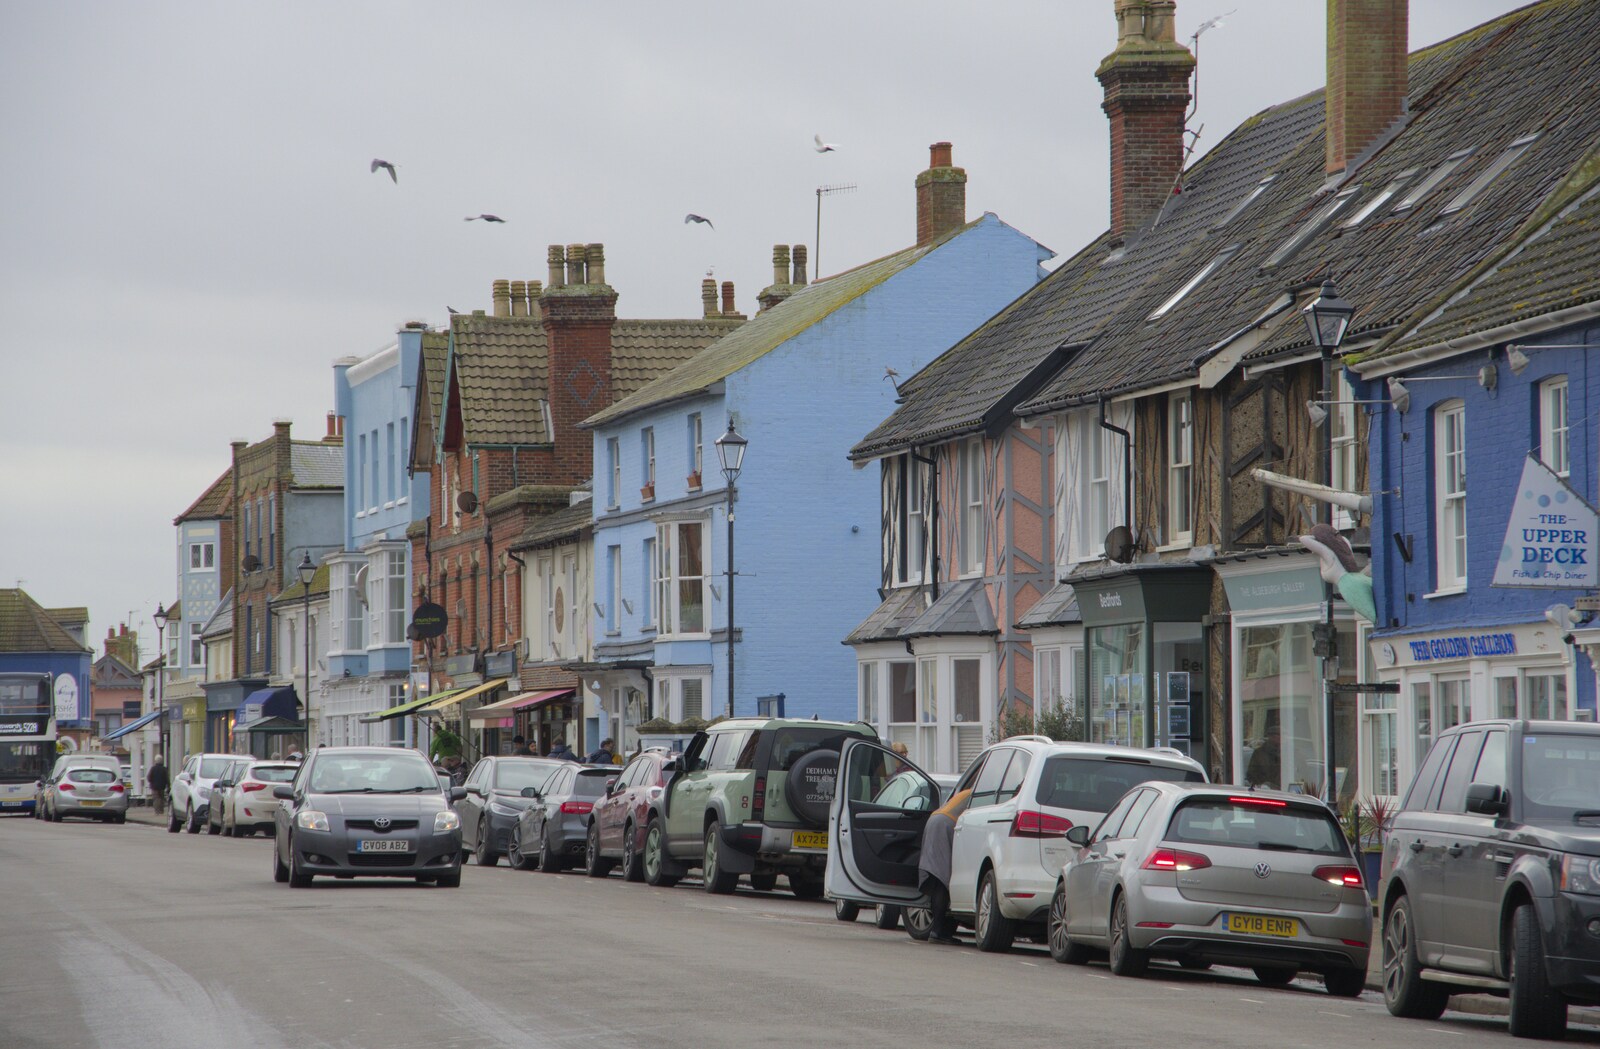 Aldeburgh High Street from Framlingham, Aldeburgh and the USAAF Heritage Trust, Hoxne, Suffolk - 14th February 2024 